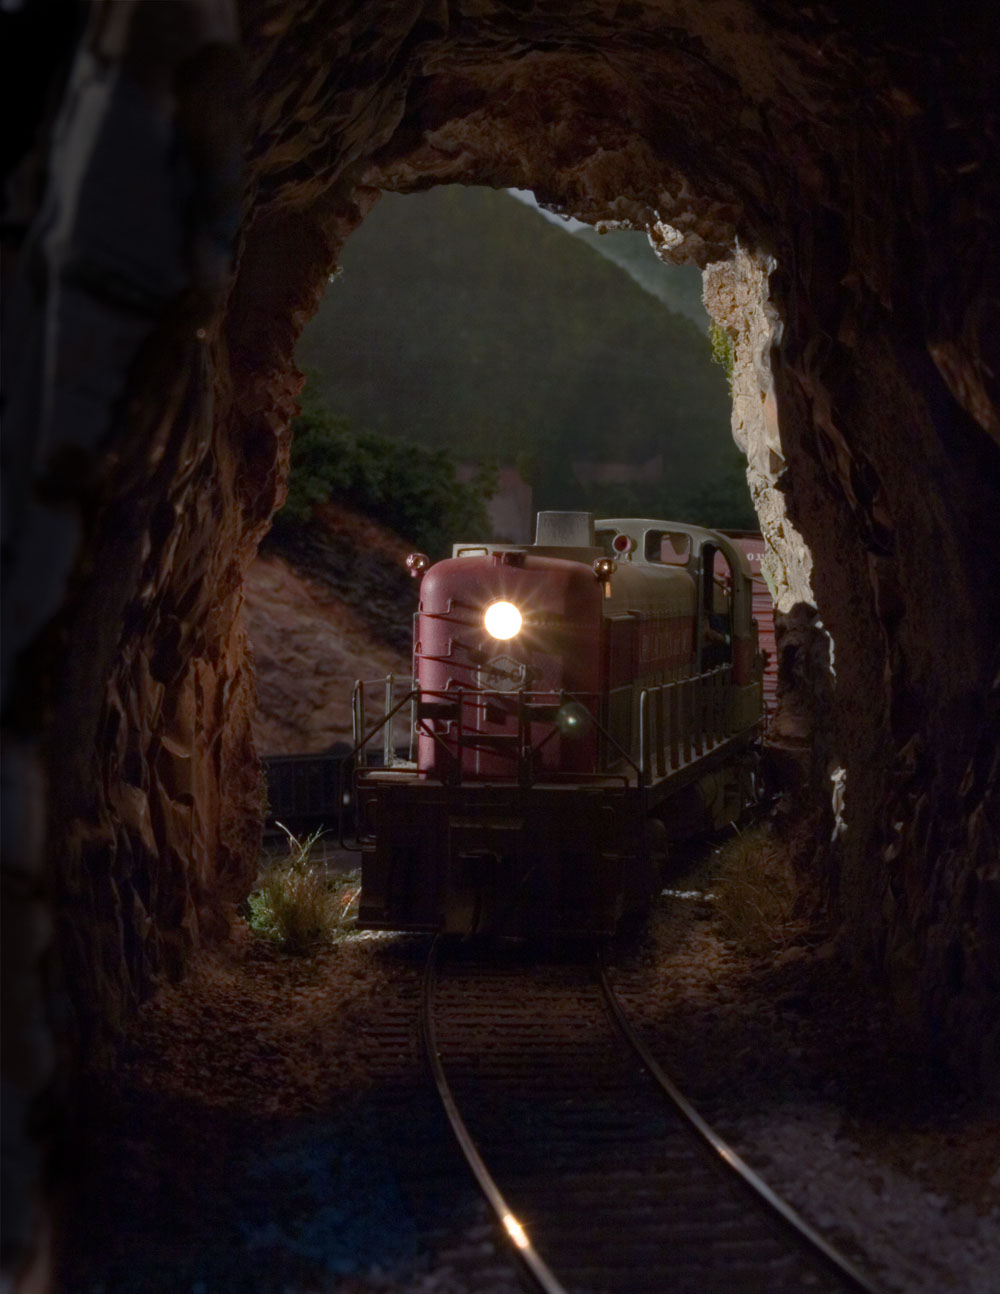  A&amp;O #137 enters Speedy Tunnel having climbed the Morrison grade leaving the Willow Creek valley in the distance. 